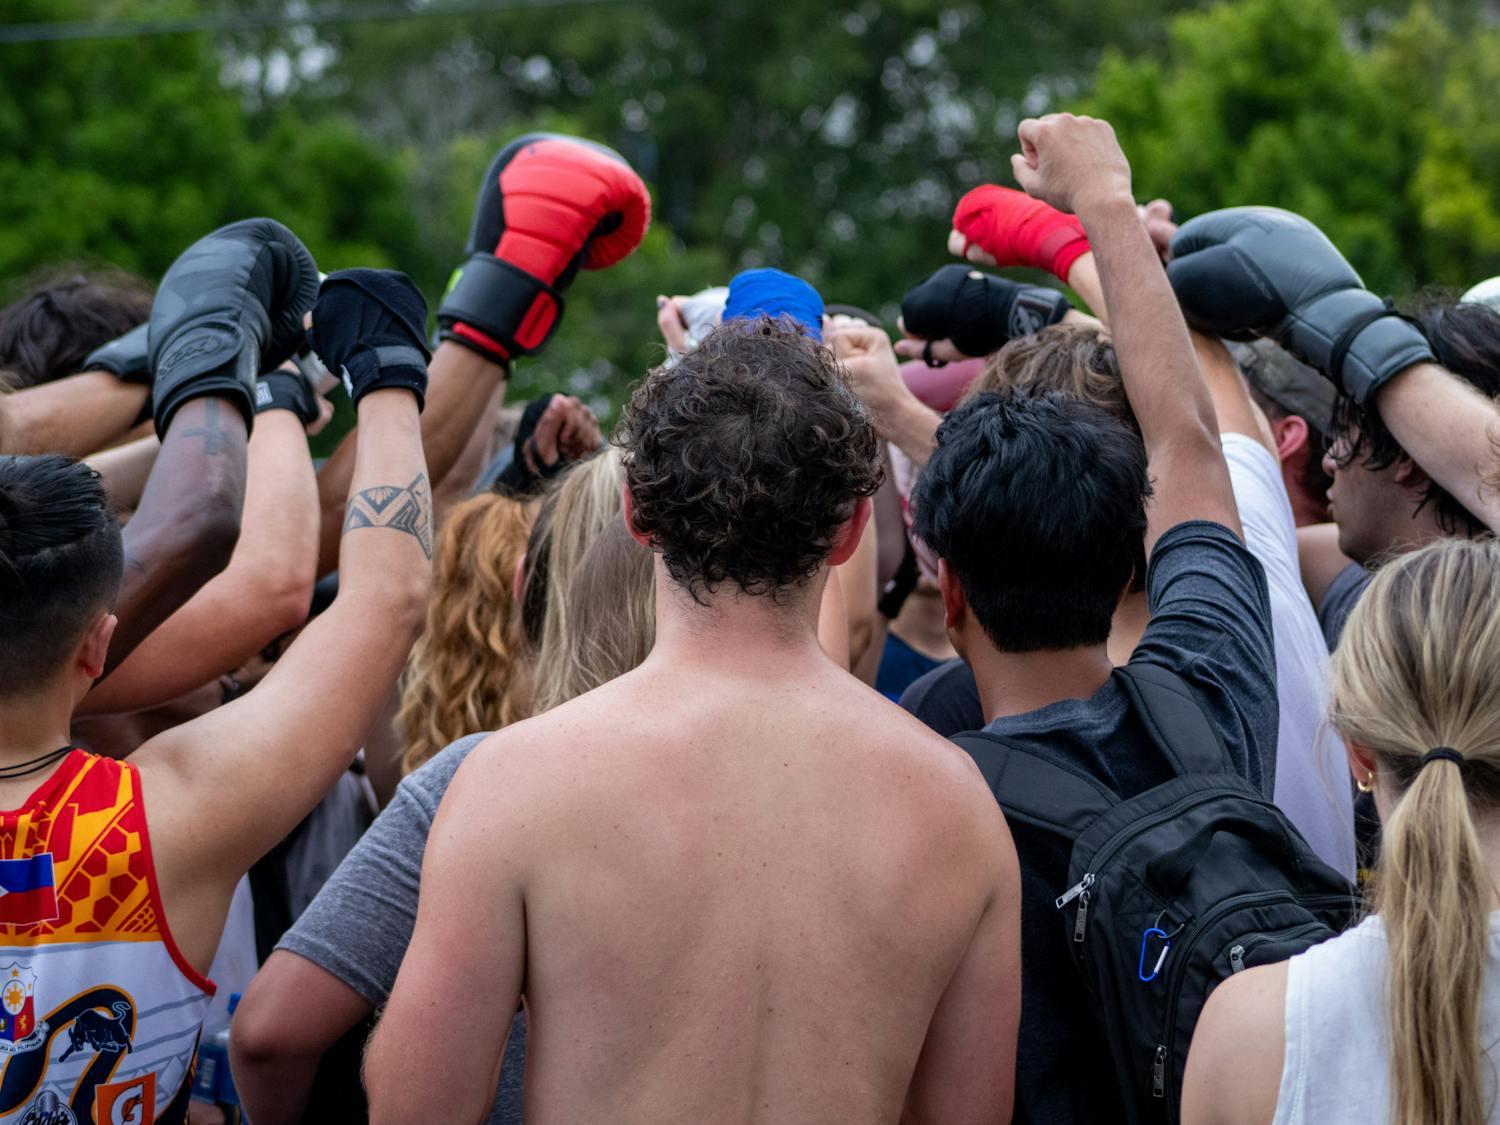 Members of the Carolina Boxing Club raise their fists up in a final salute to conclude training. The Carolina Boxing Club gathered Sept. 12, 2022, at Battle Boxing Gym to prepare for the upcoming season.  